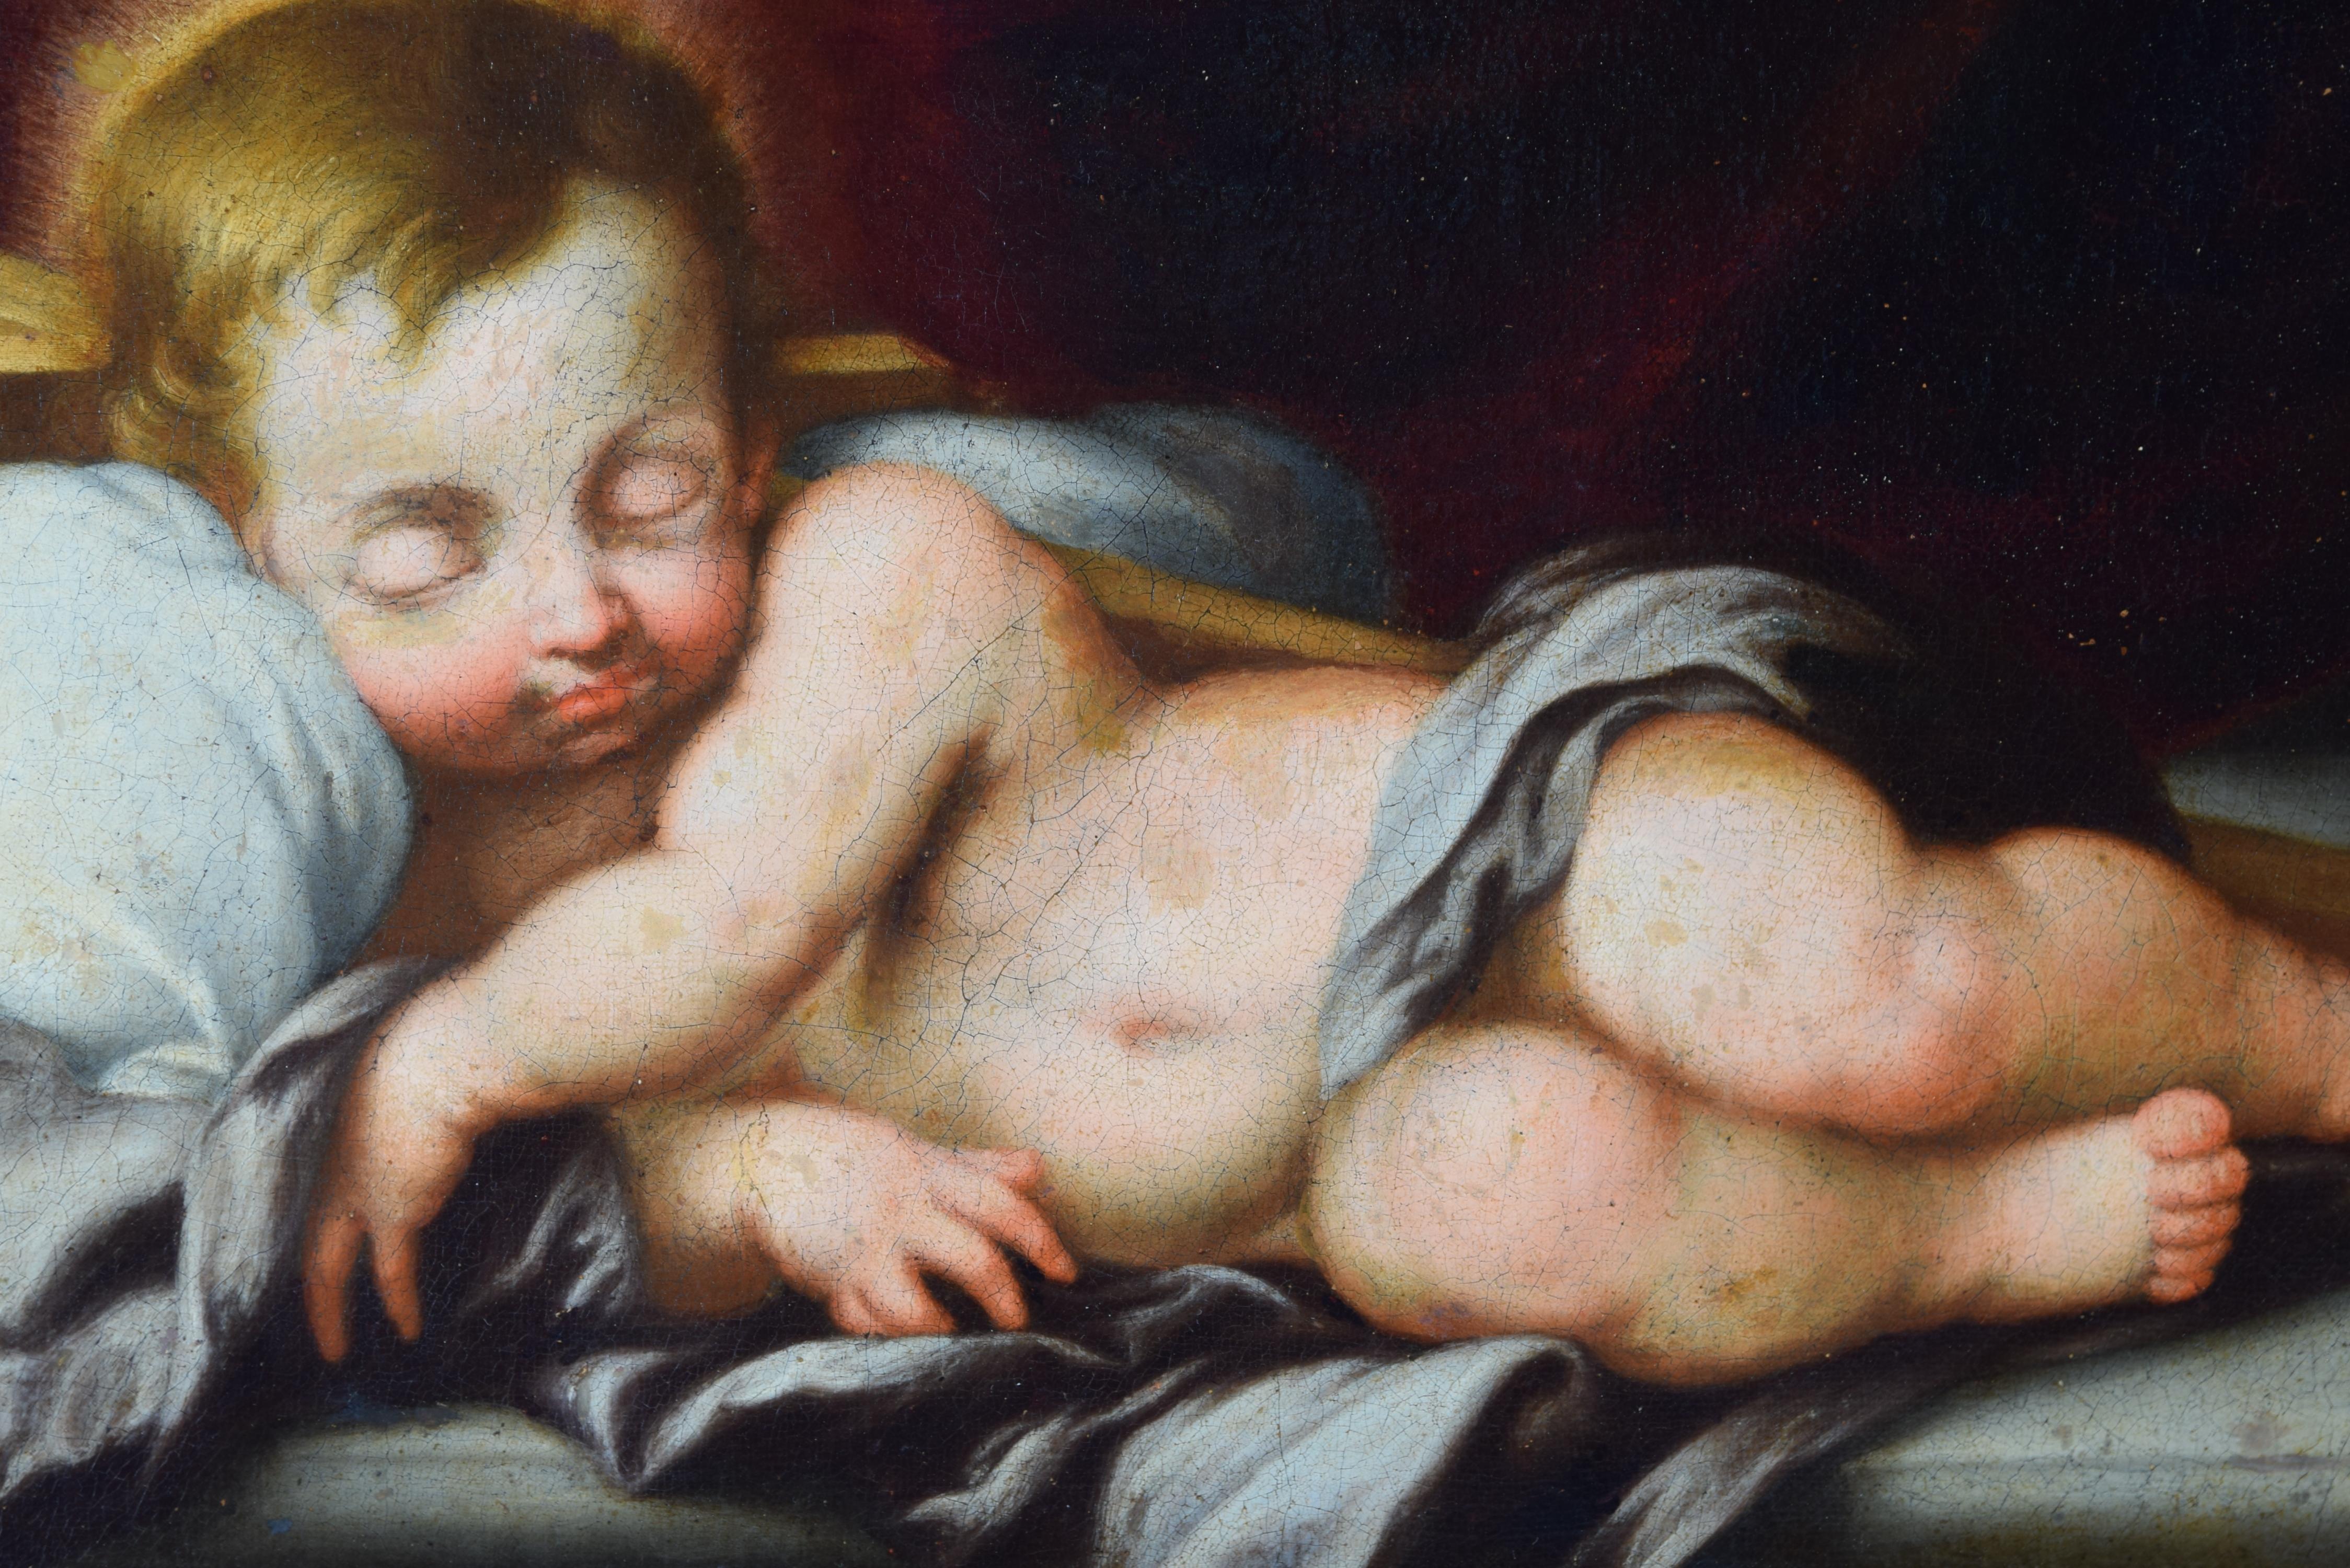 Sleeping Baby Jesus and Saint John, couple. Oil paintings on canvas. Linked to the environment of MURILLO, Bartolomé Esteban (Seville, b. 1618-1682). Spanish school, 17th century. 
Pair of oil paintings on landscape canvas that match both the